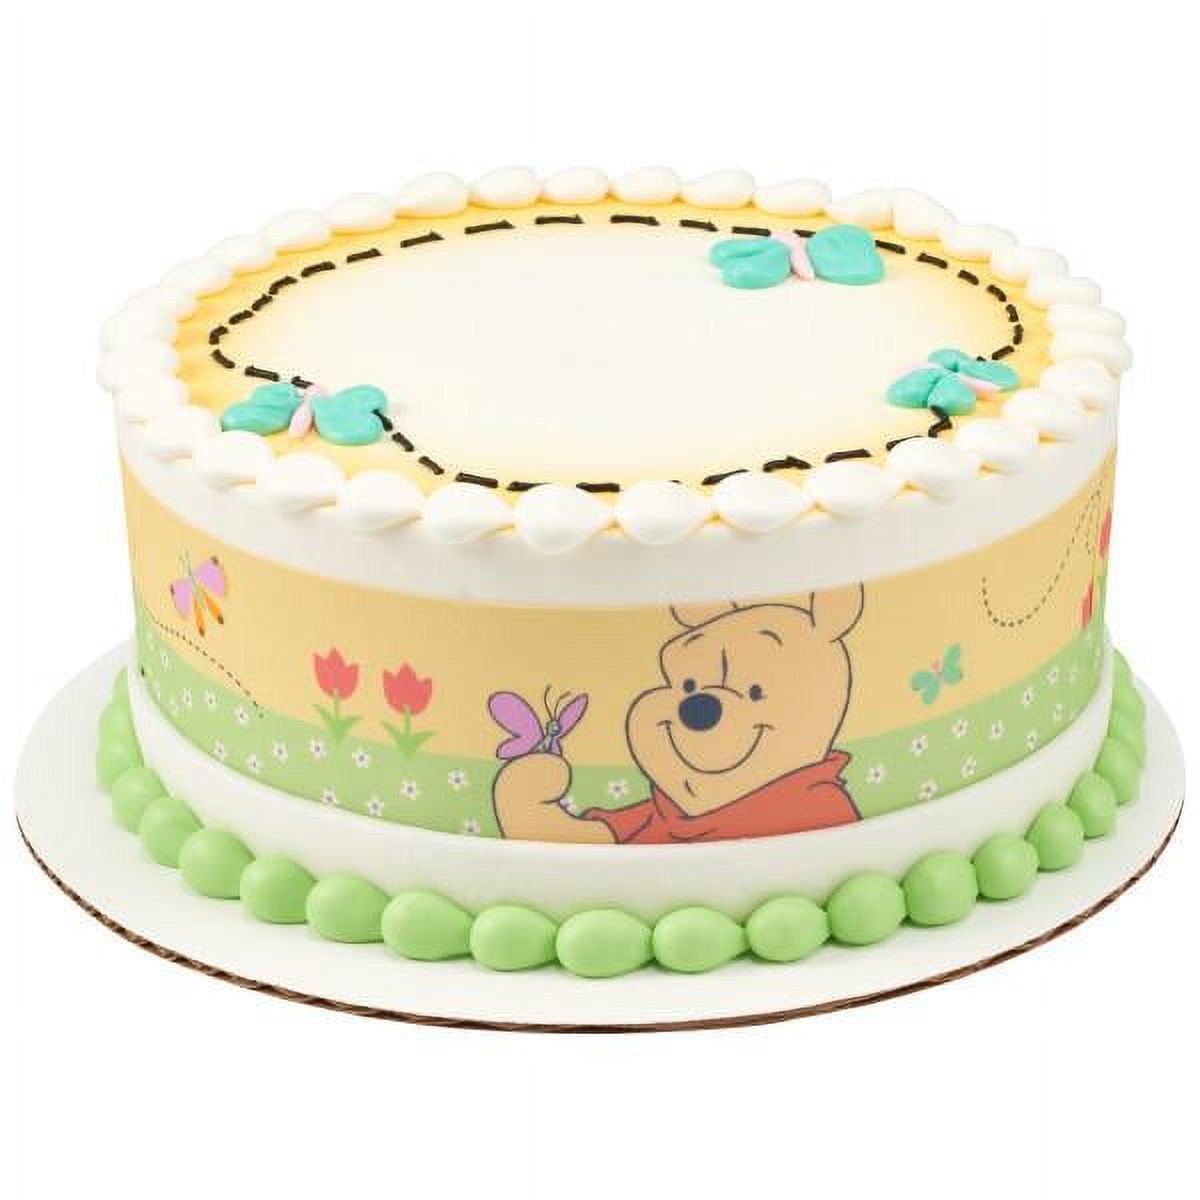 Winnie the Pooh Edible Cake Topper Image Strips 